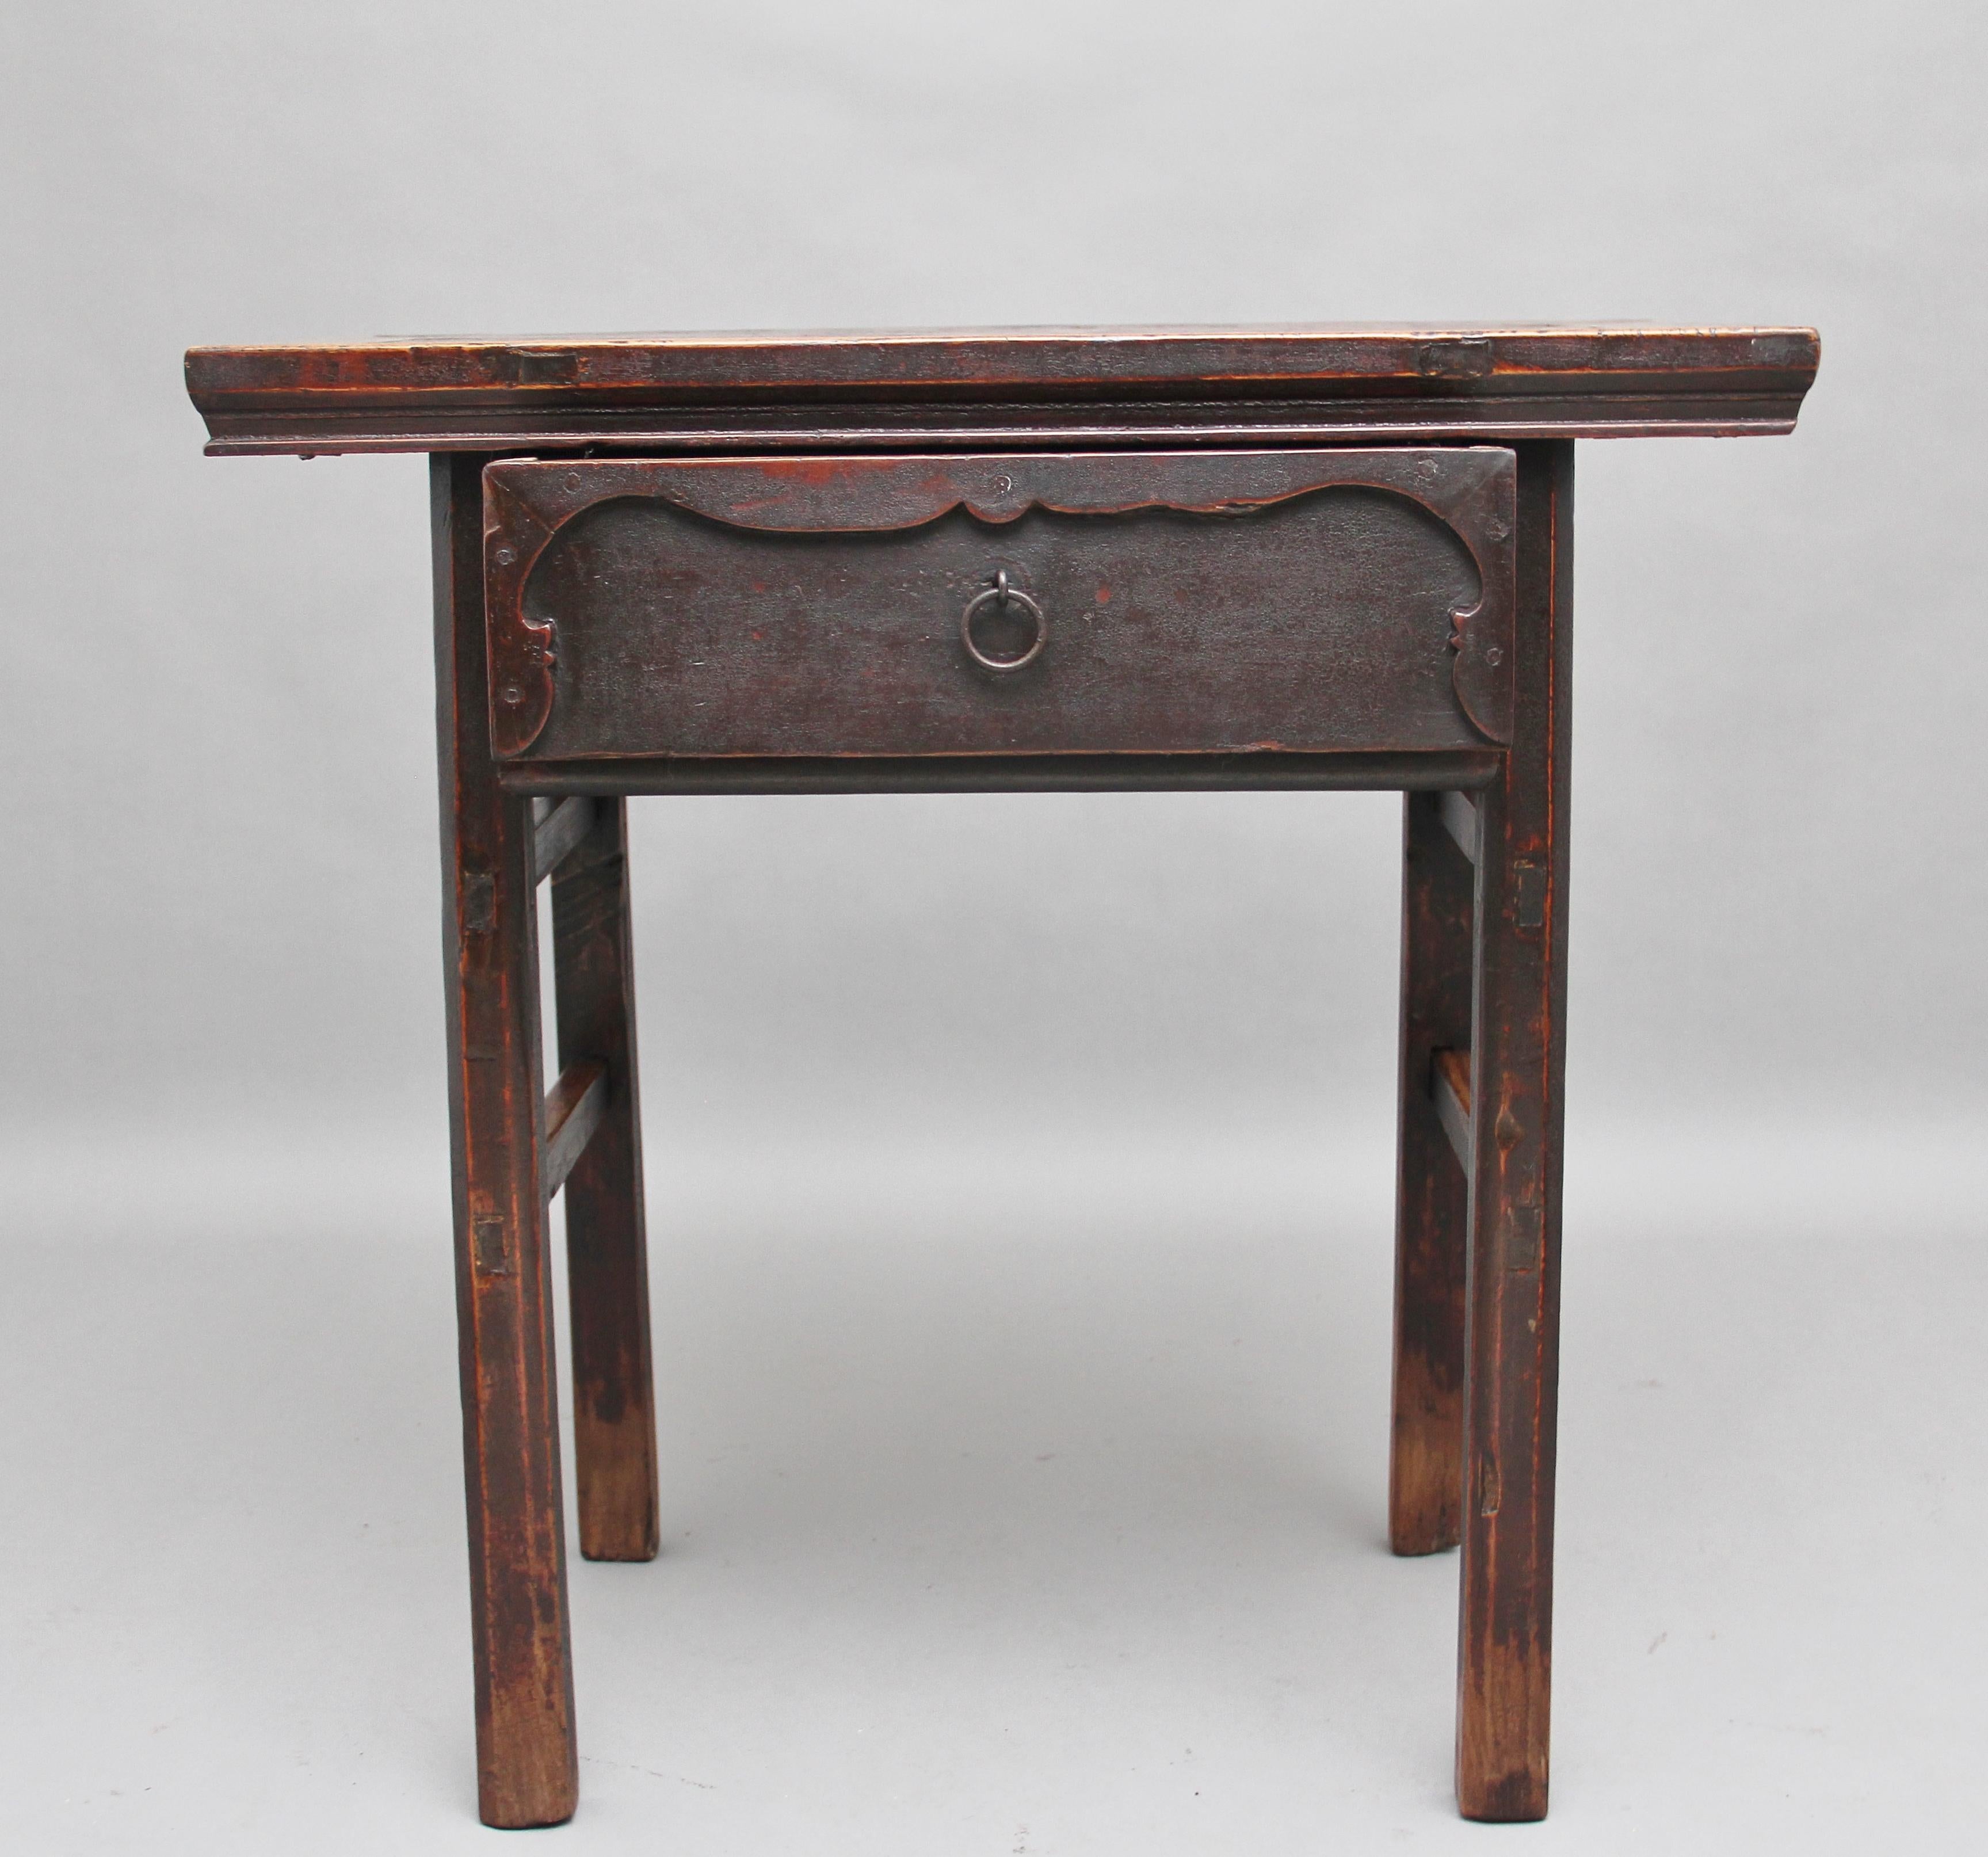 19th century Chinese elm side table, the rectangular top above a single drawer with carved decoration on the drawer front with original brass ring handle, standing on square legs united with side stretchers, circa 1880.